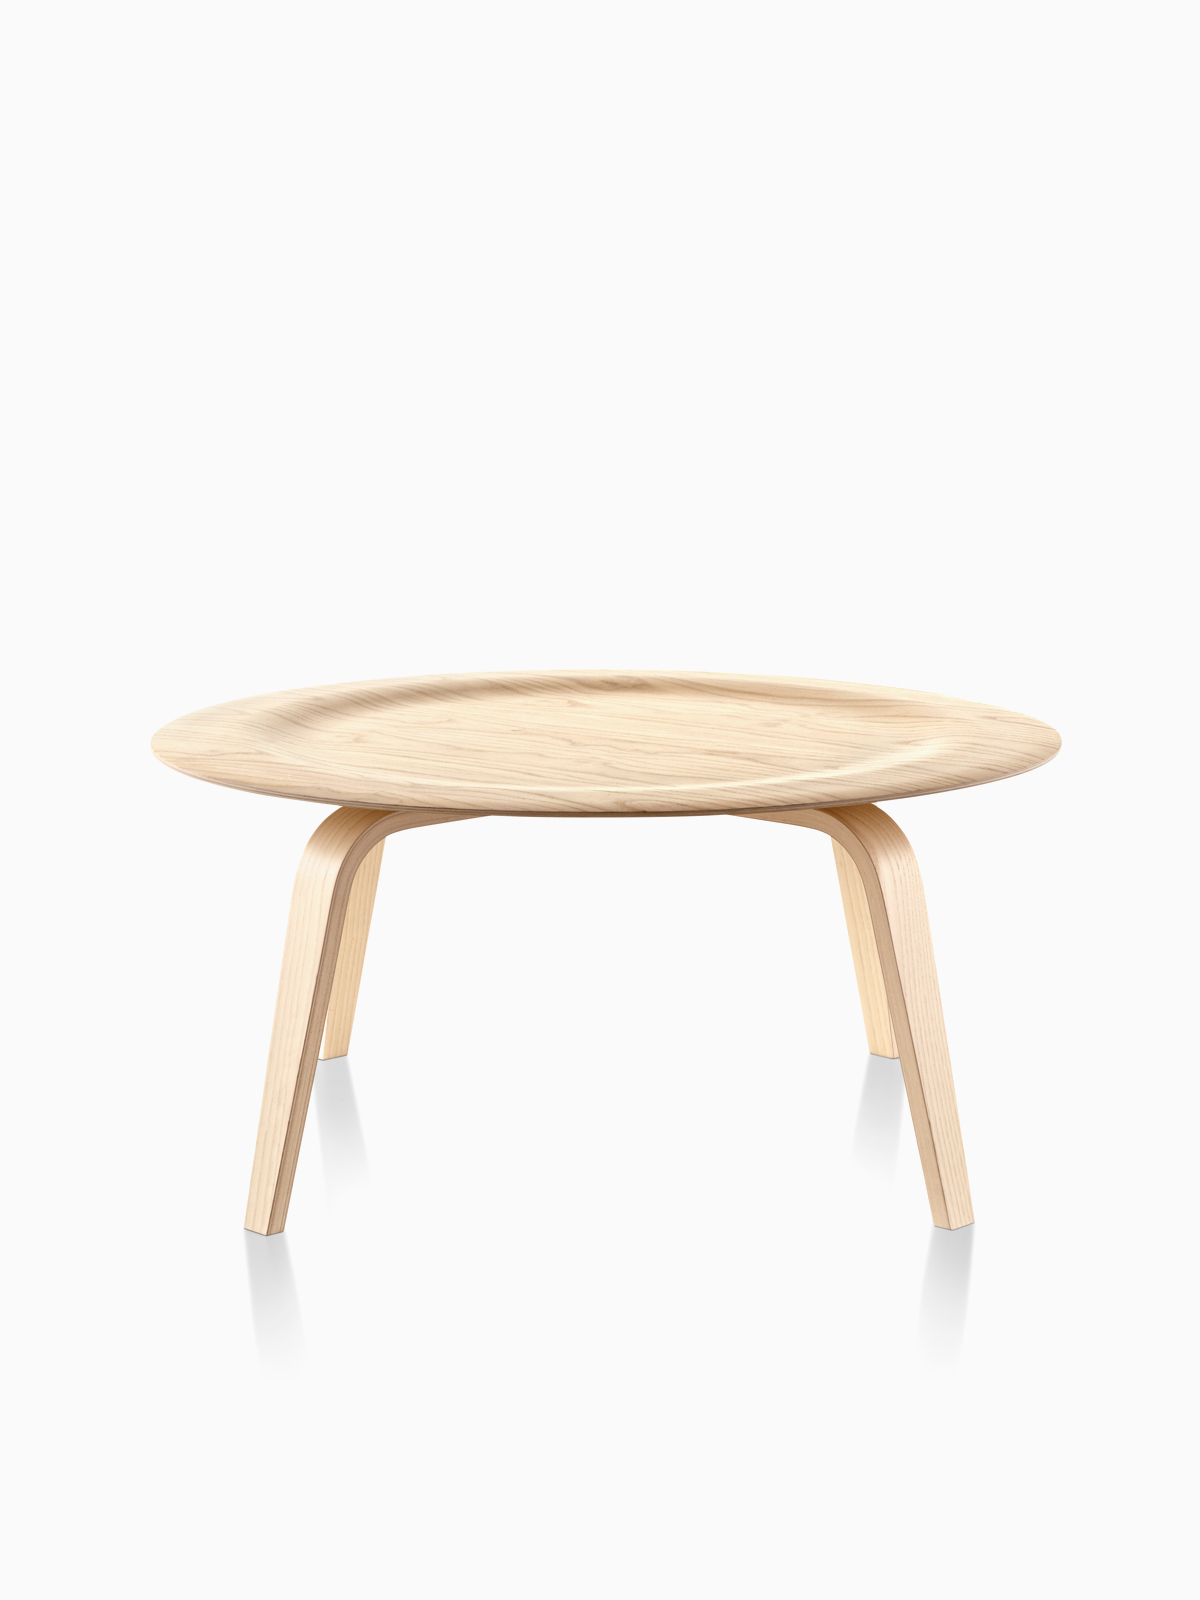 Eames Moulded Plywood Coffee Table